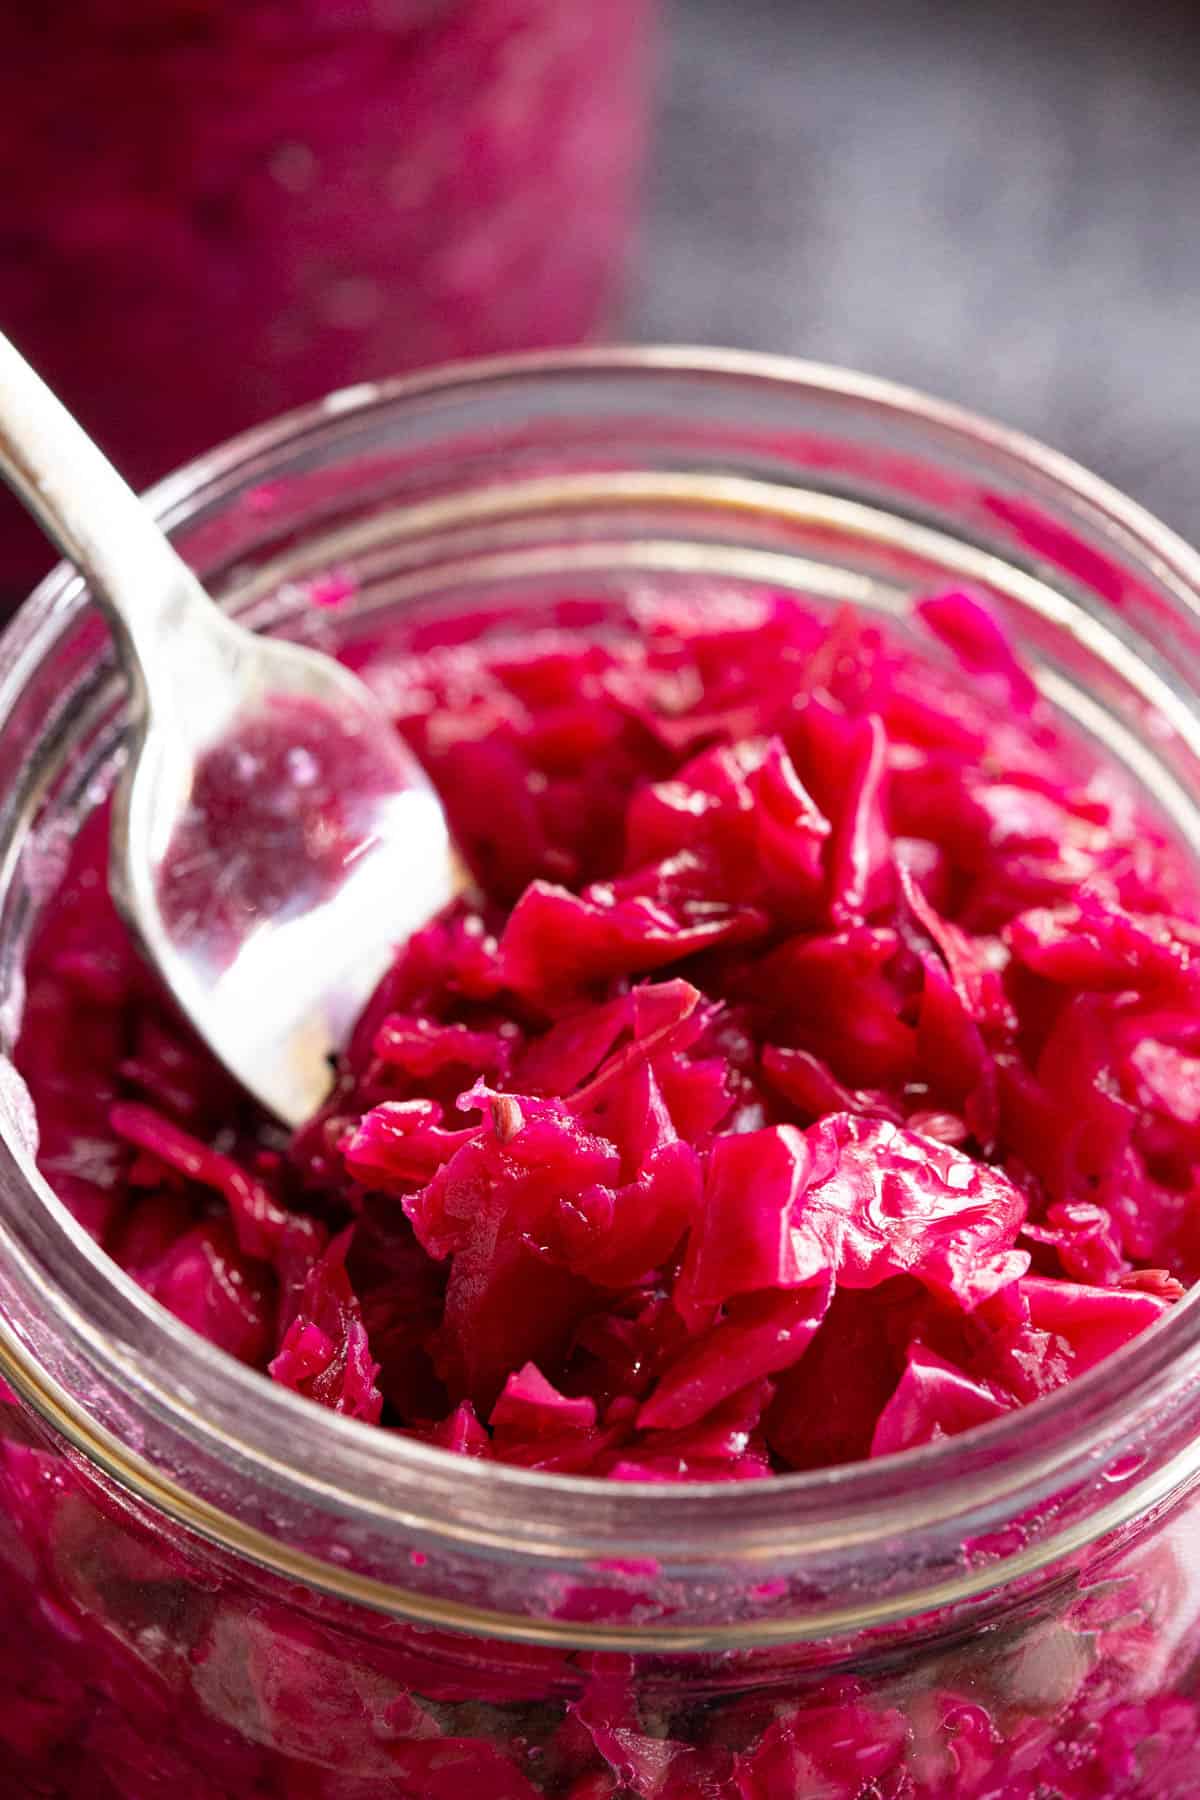 A fork scoops out bright red sauerkraut from a jar.